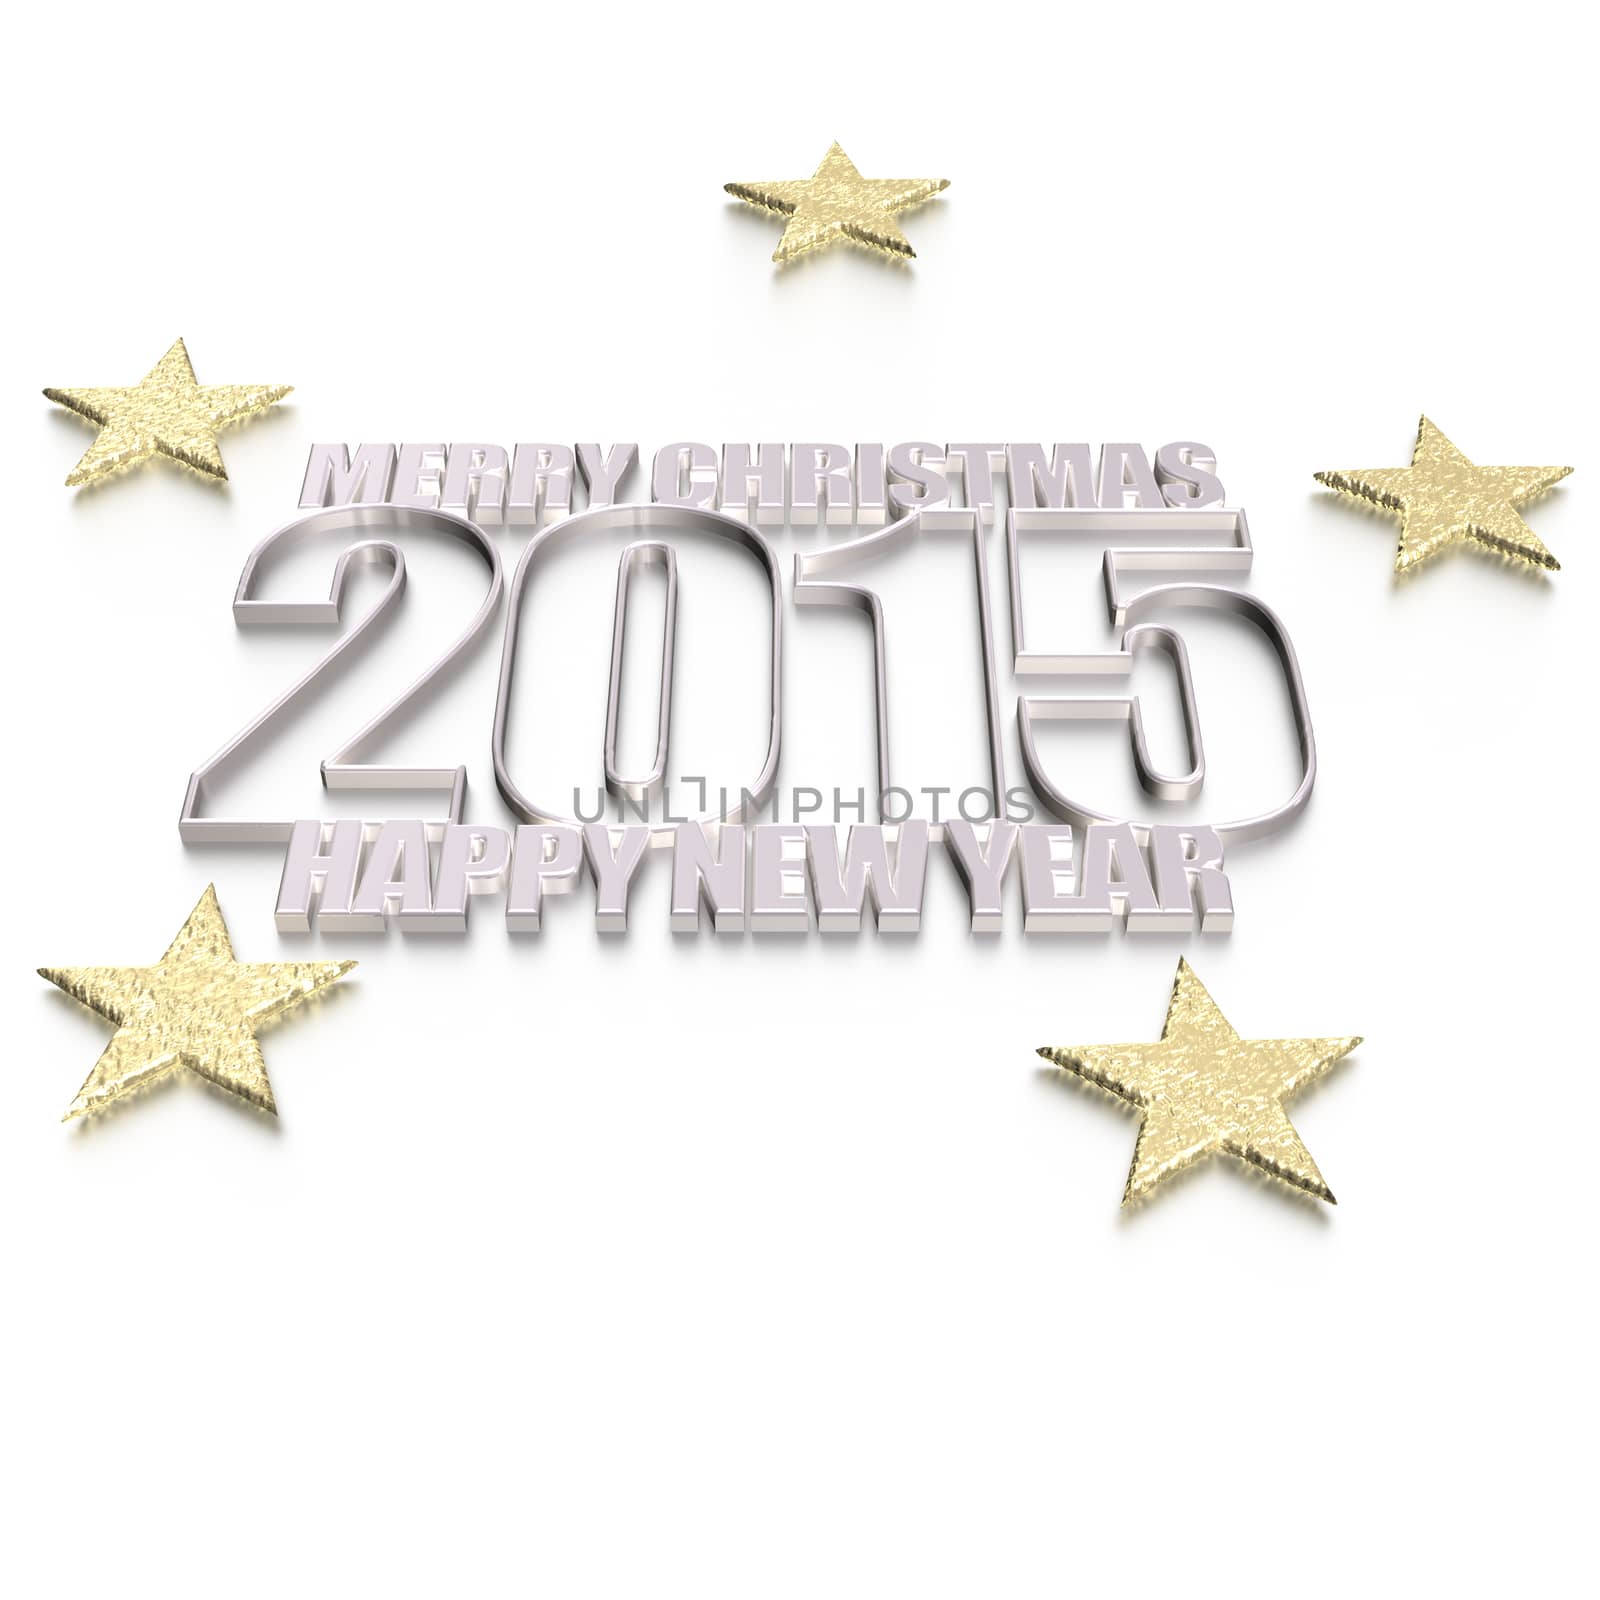 3d text 2015 happy new year design.